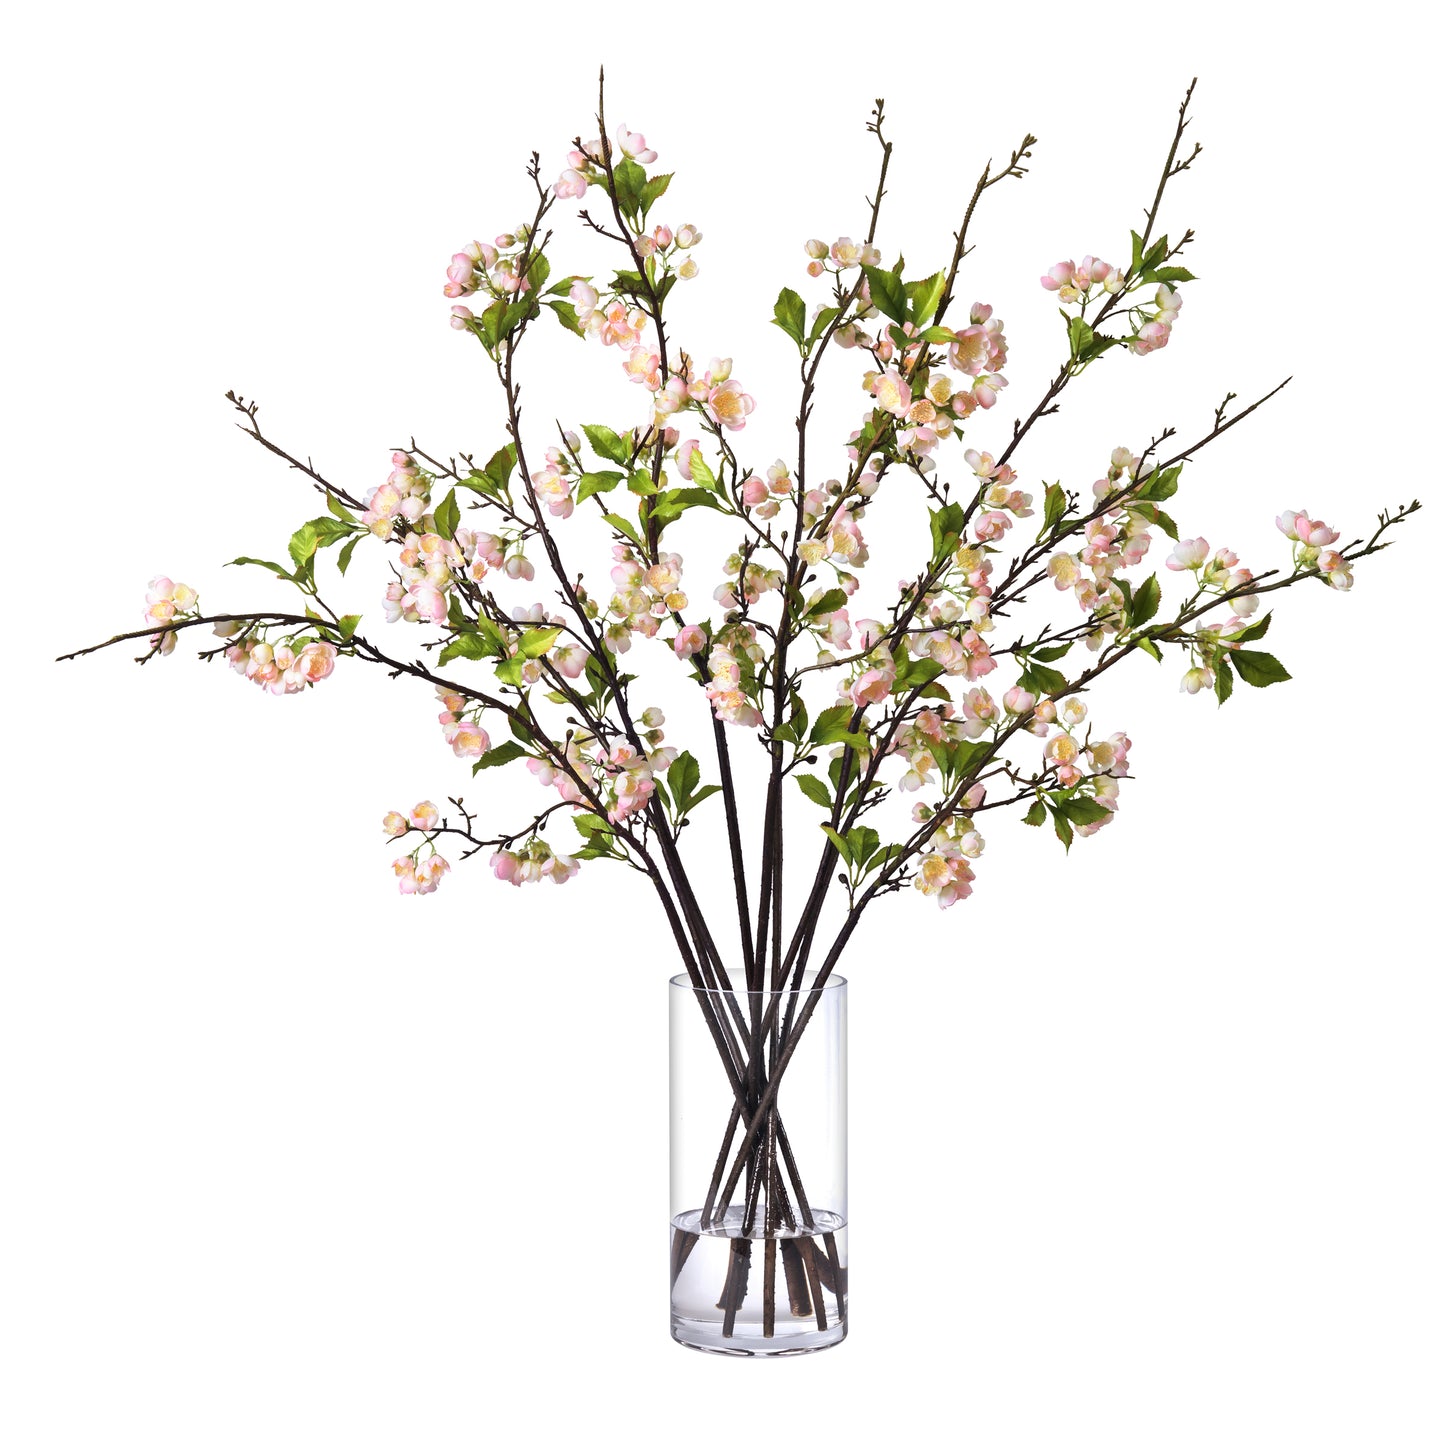 Blush Plum Branches in Glass Vase- Diane James Home | Faux Floral Couture Handmade In The USA